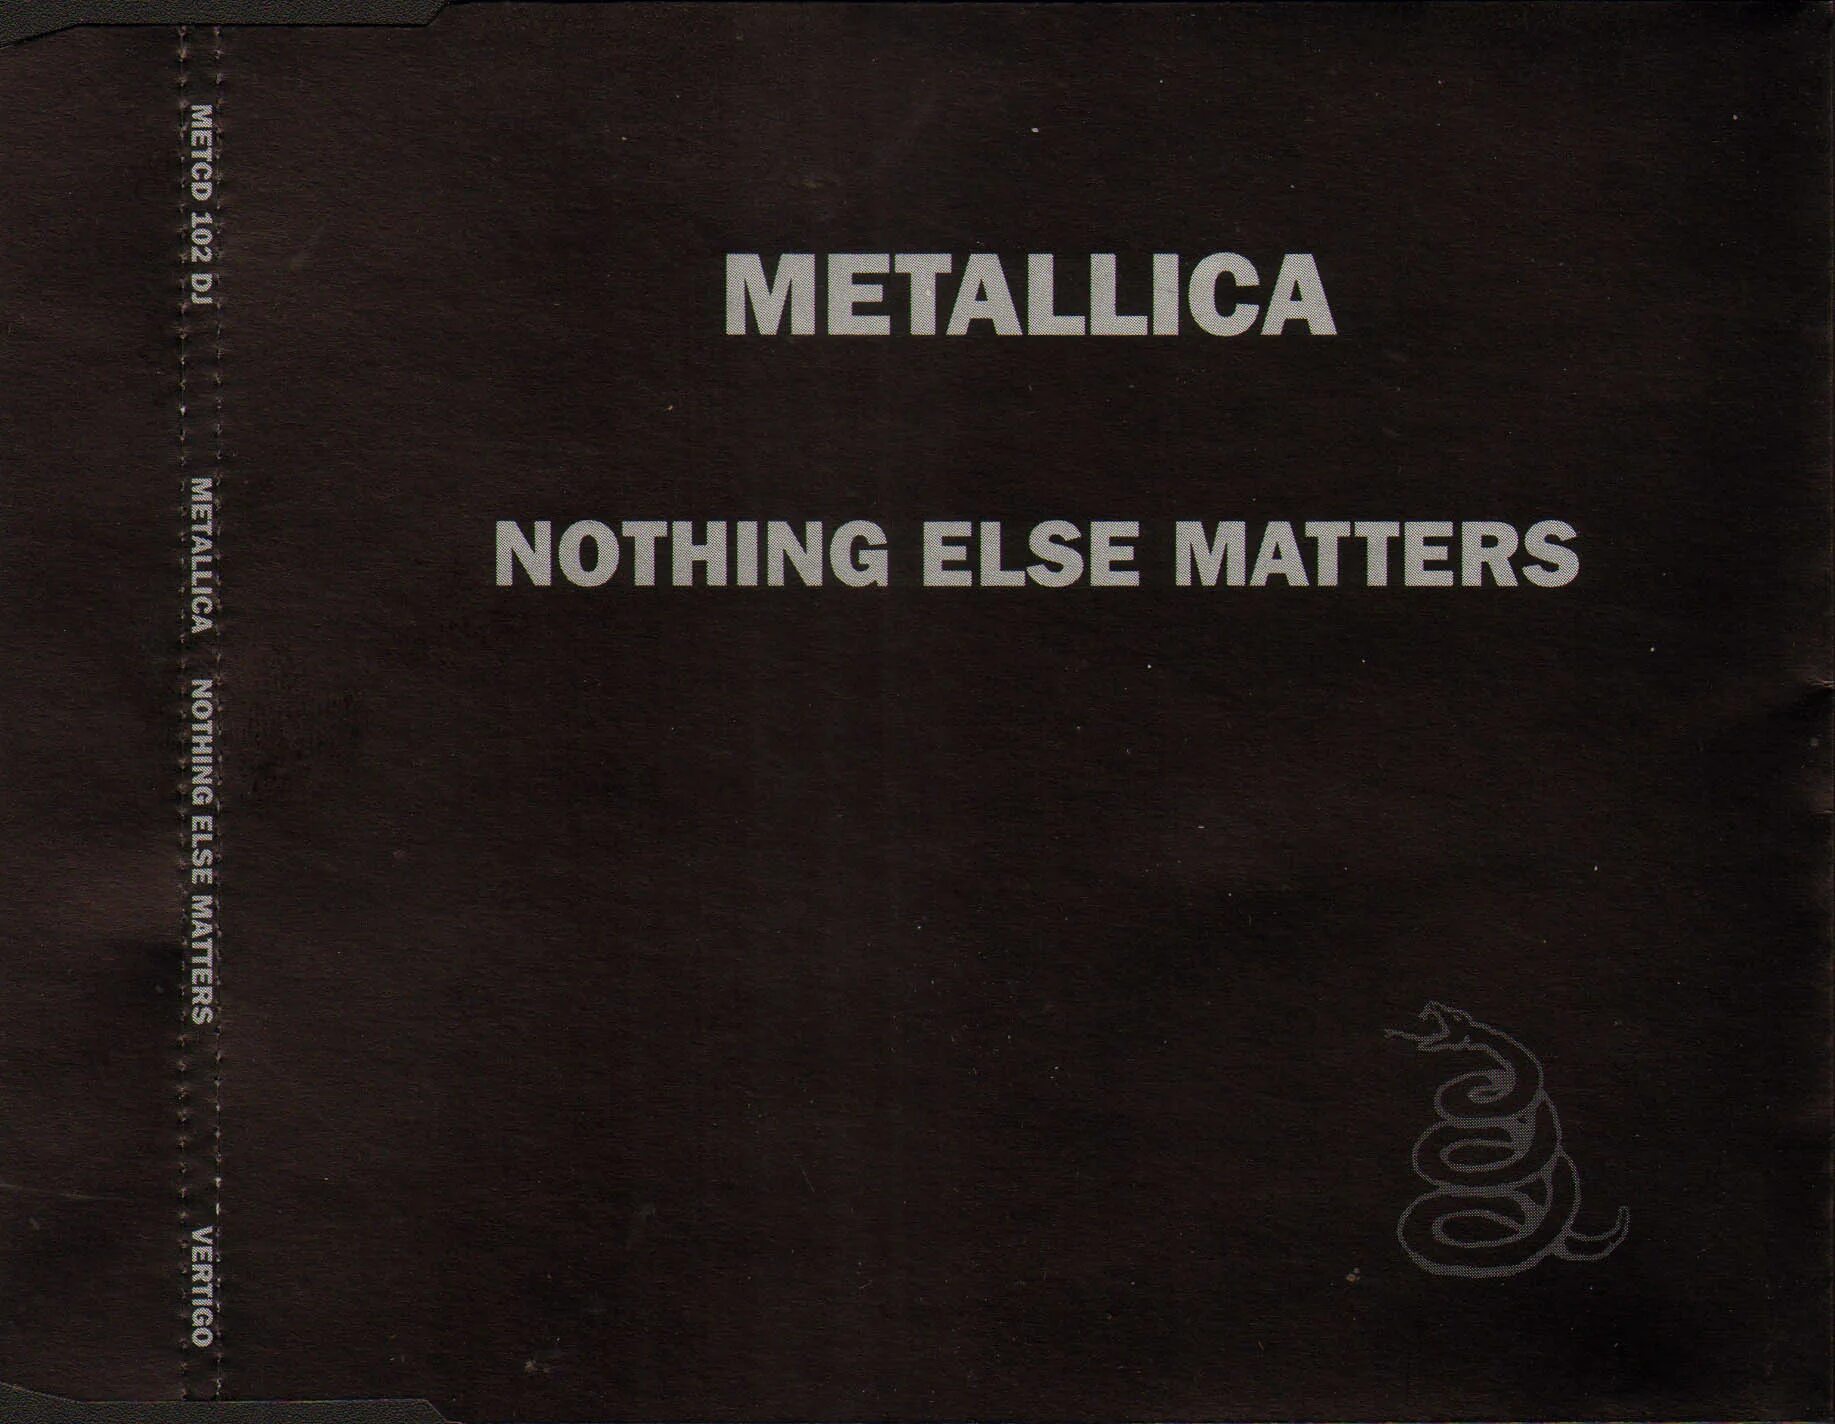 Nothing matters the last. Nothing else matters. Металлика nothing else matters. Группа Metallica nothing else matters. Metallica nothing else matters альбом.